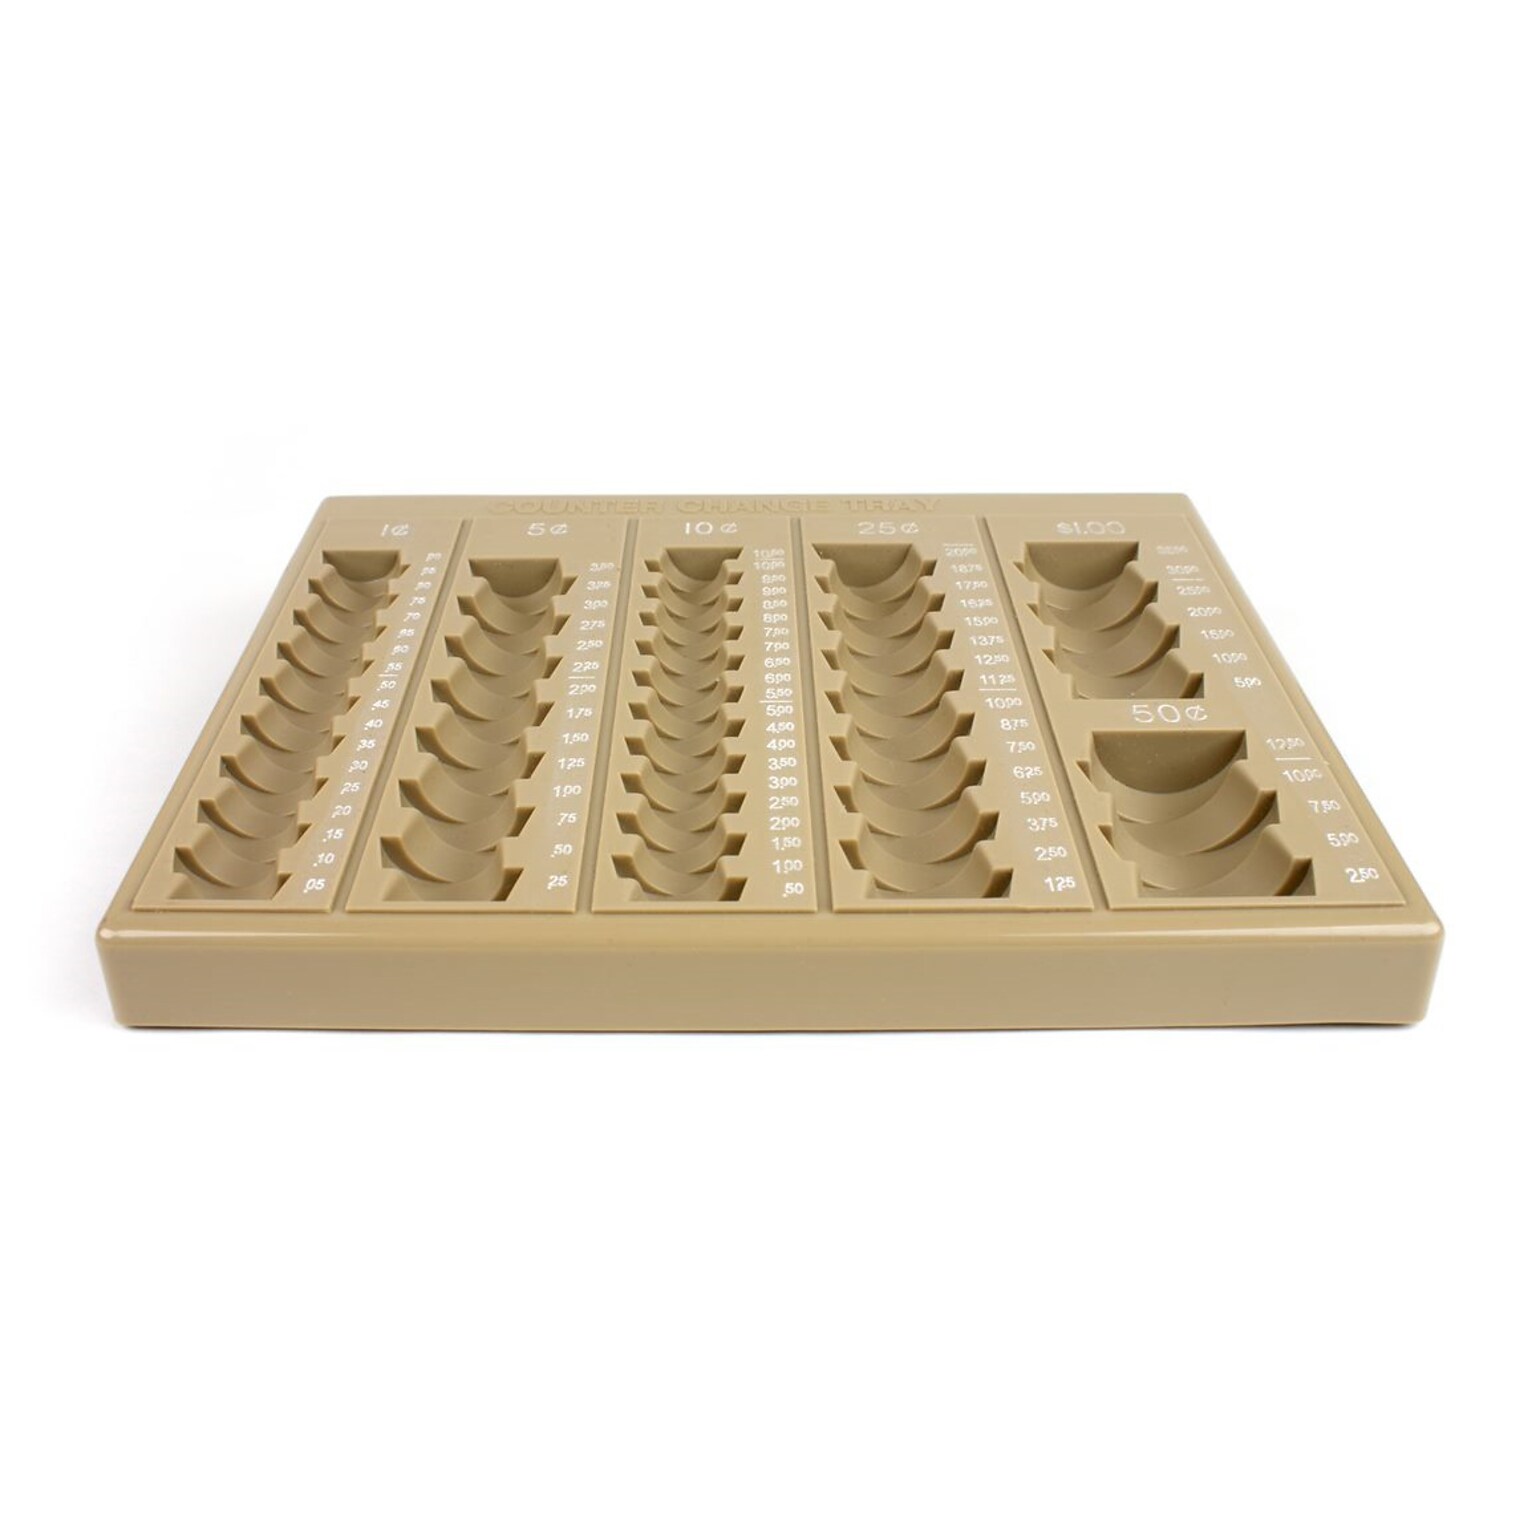 CONTROLTEK Coin Tray, 6 Compartments, Ivory (500023)